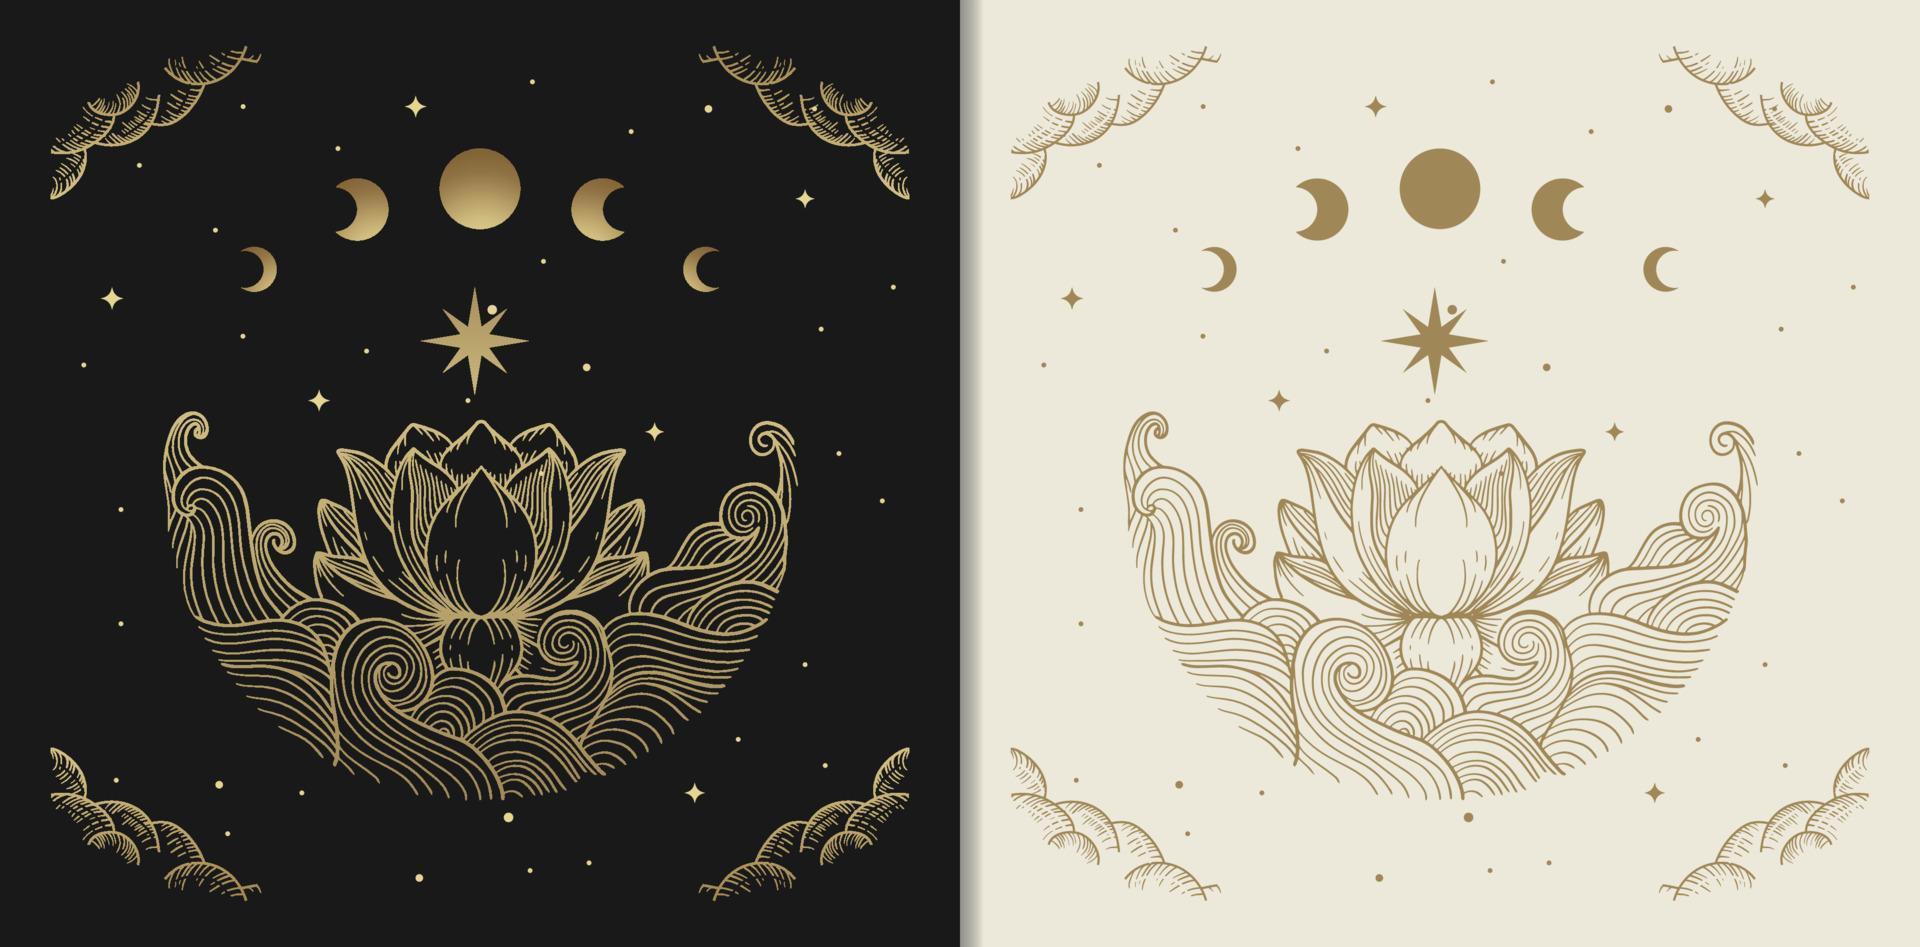 Gold water lily engraving with star ornament and moon phases vector